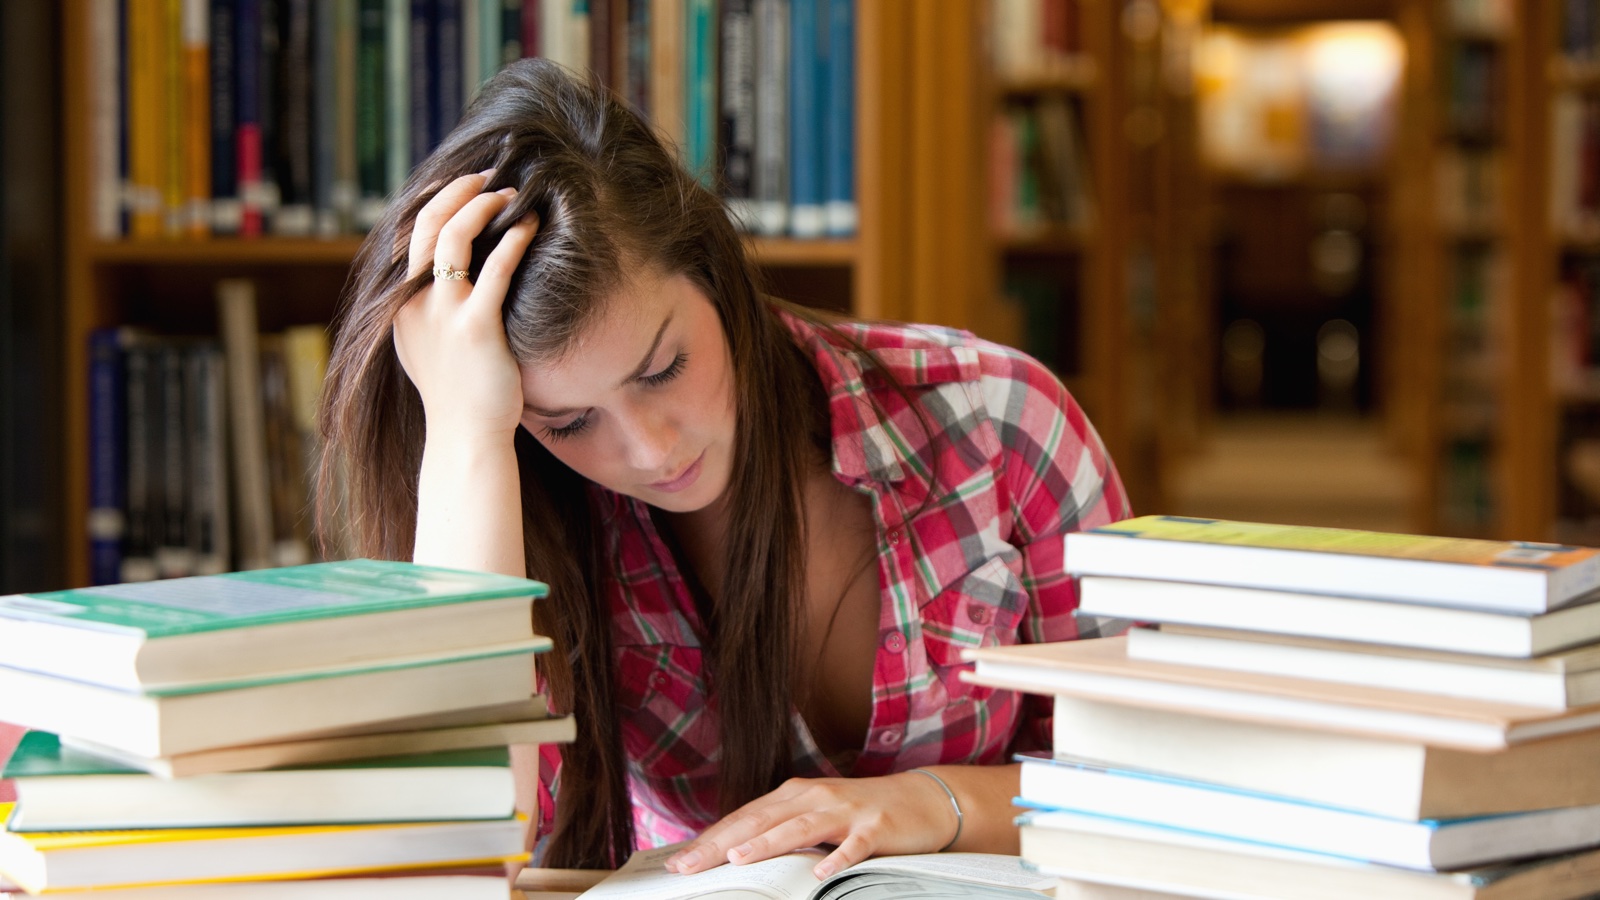 10 Tips on How to Manage College Stress When Everything Goes Wrong